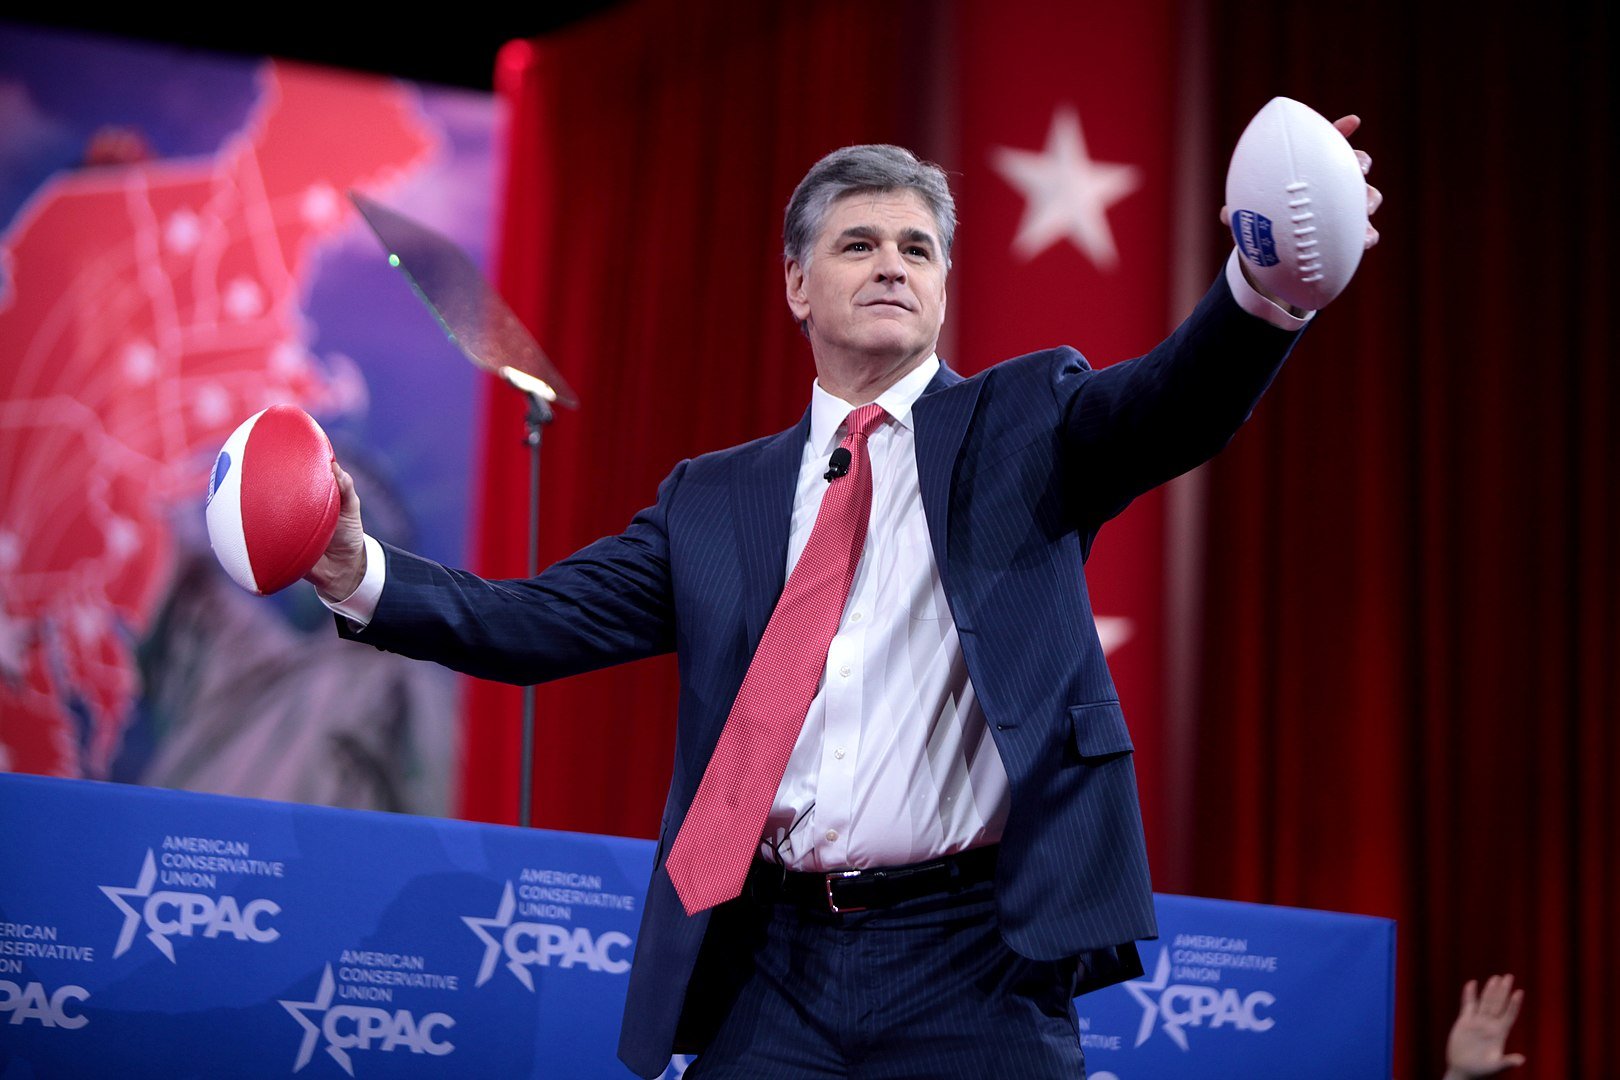 Sean Hannity speaking at the 2015 Conservative Political Action Conference in February 2015 | Photo: Wikimedia Commons Images